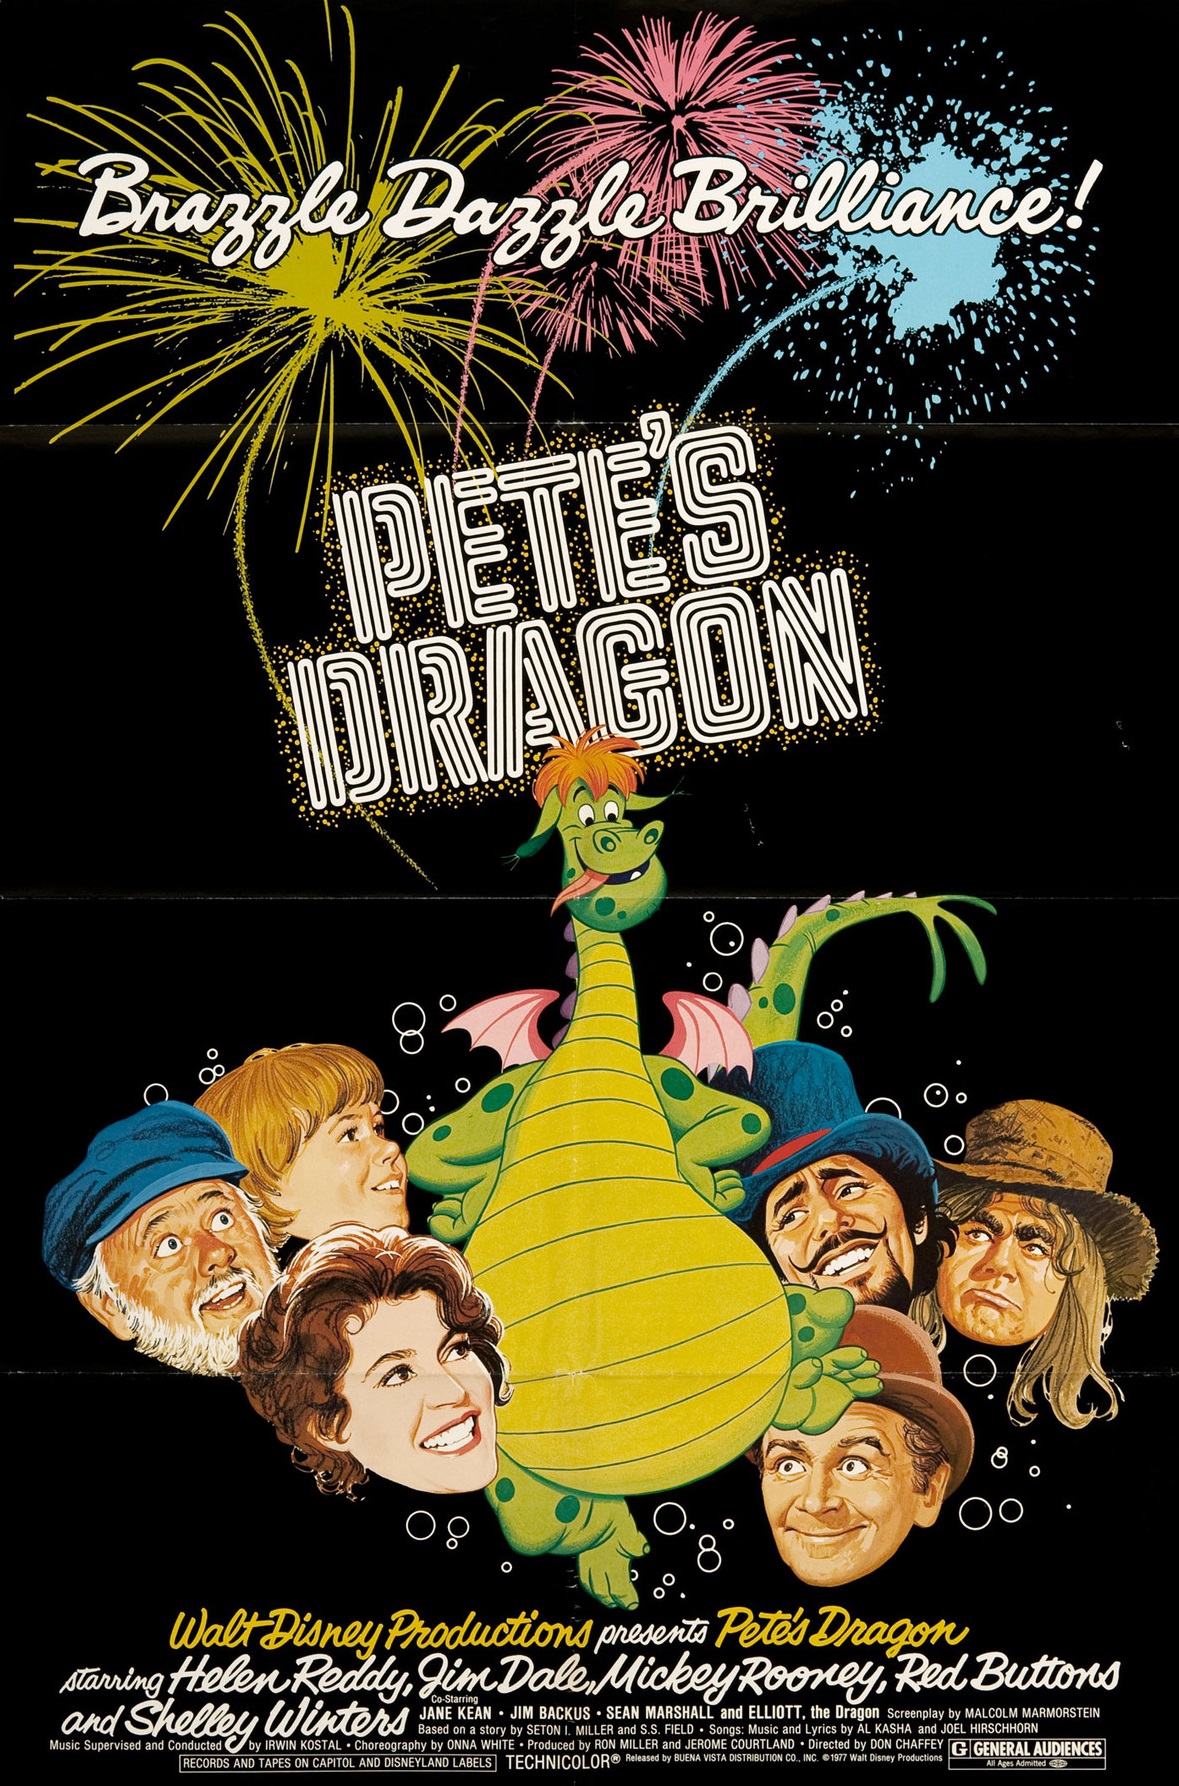 History of Pete’s Dragon